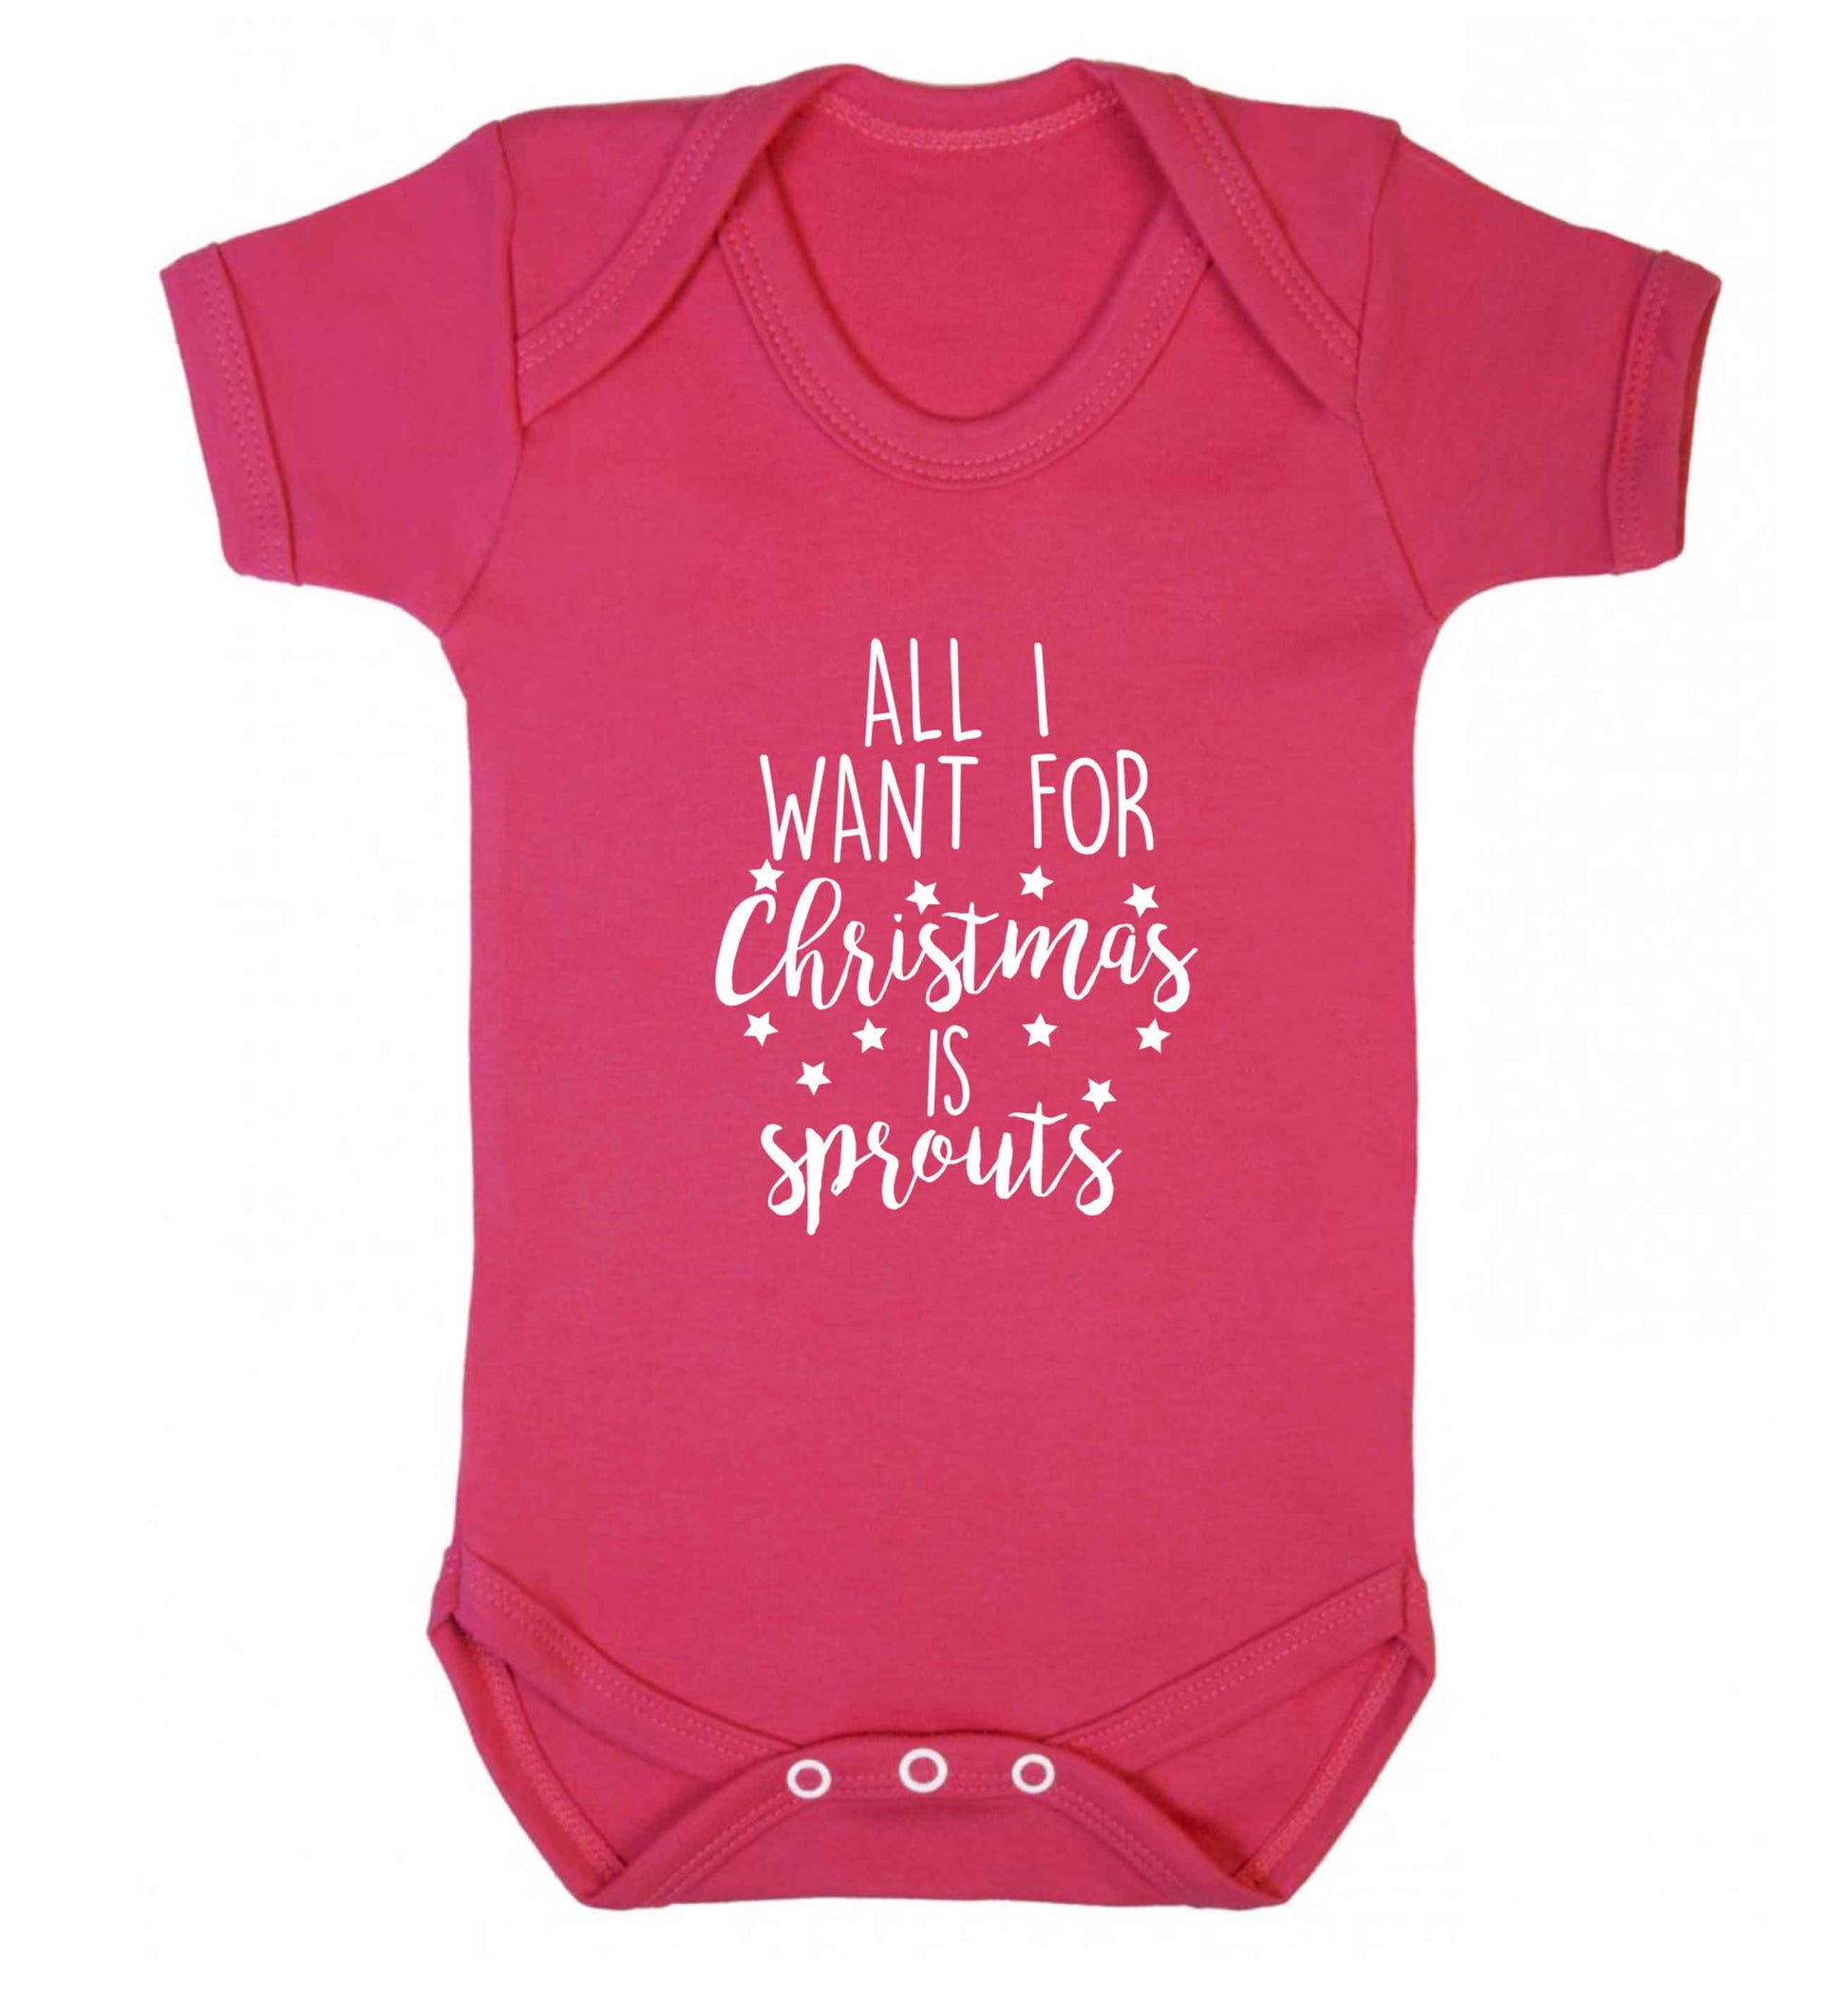 All I want for Christmas is sprouts baby vest dark pink 18-24 months